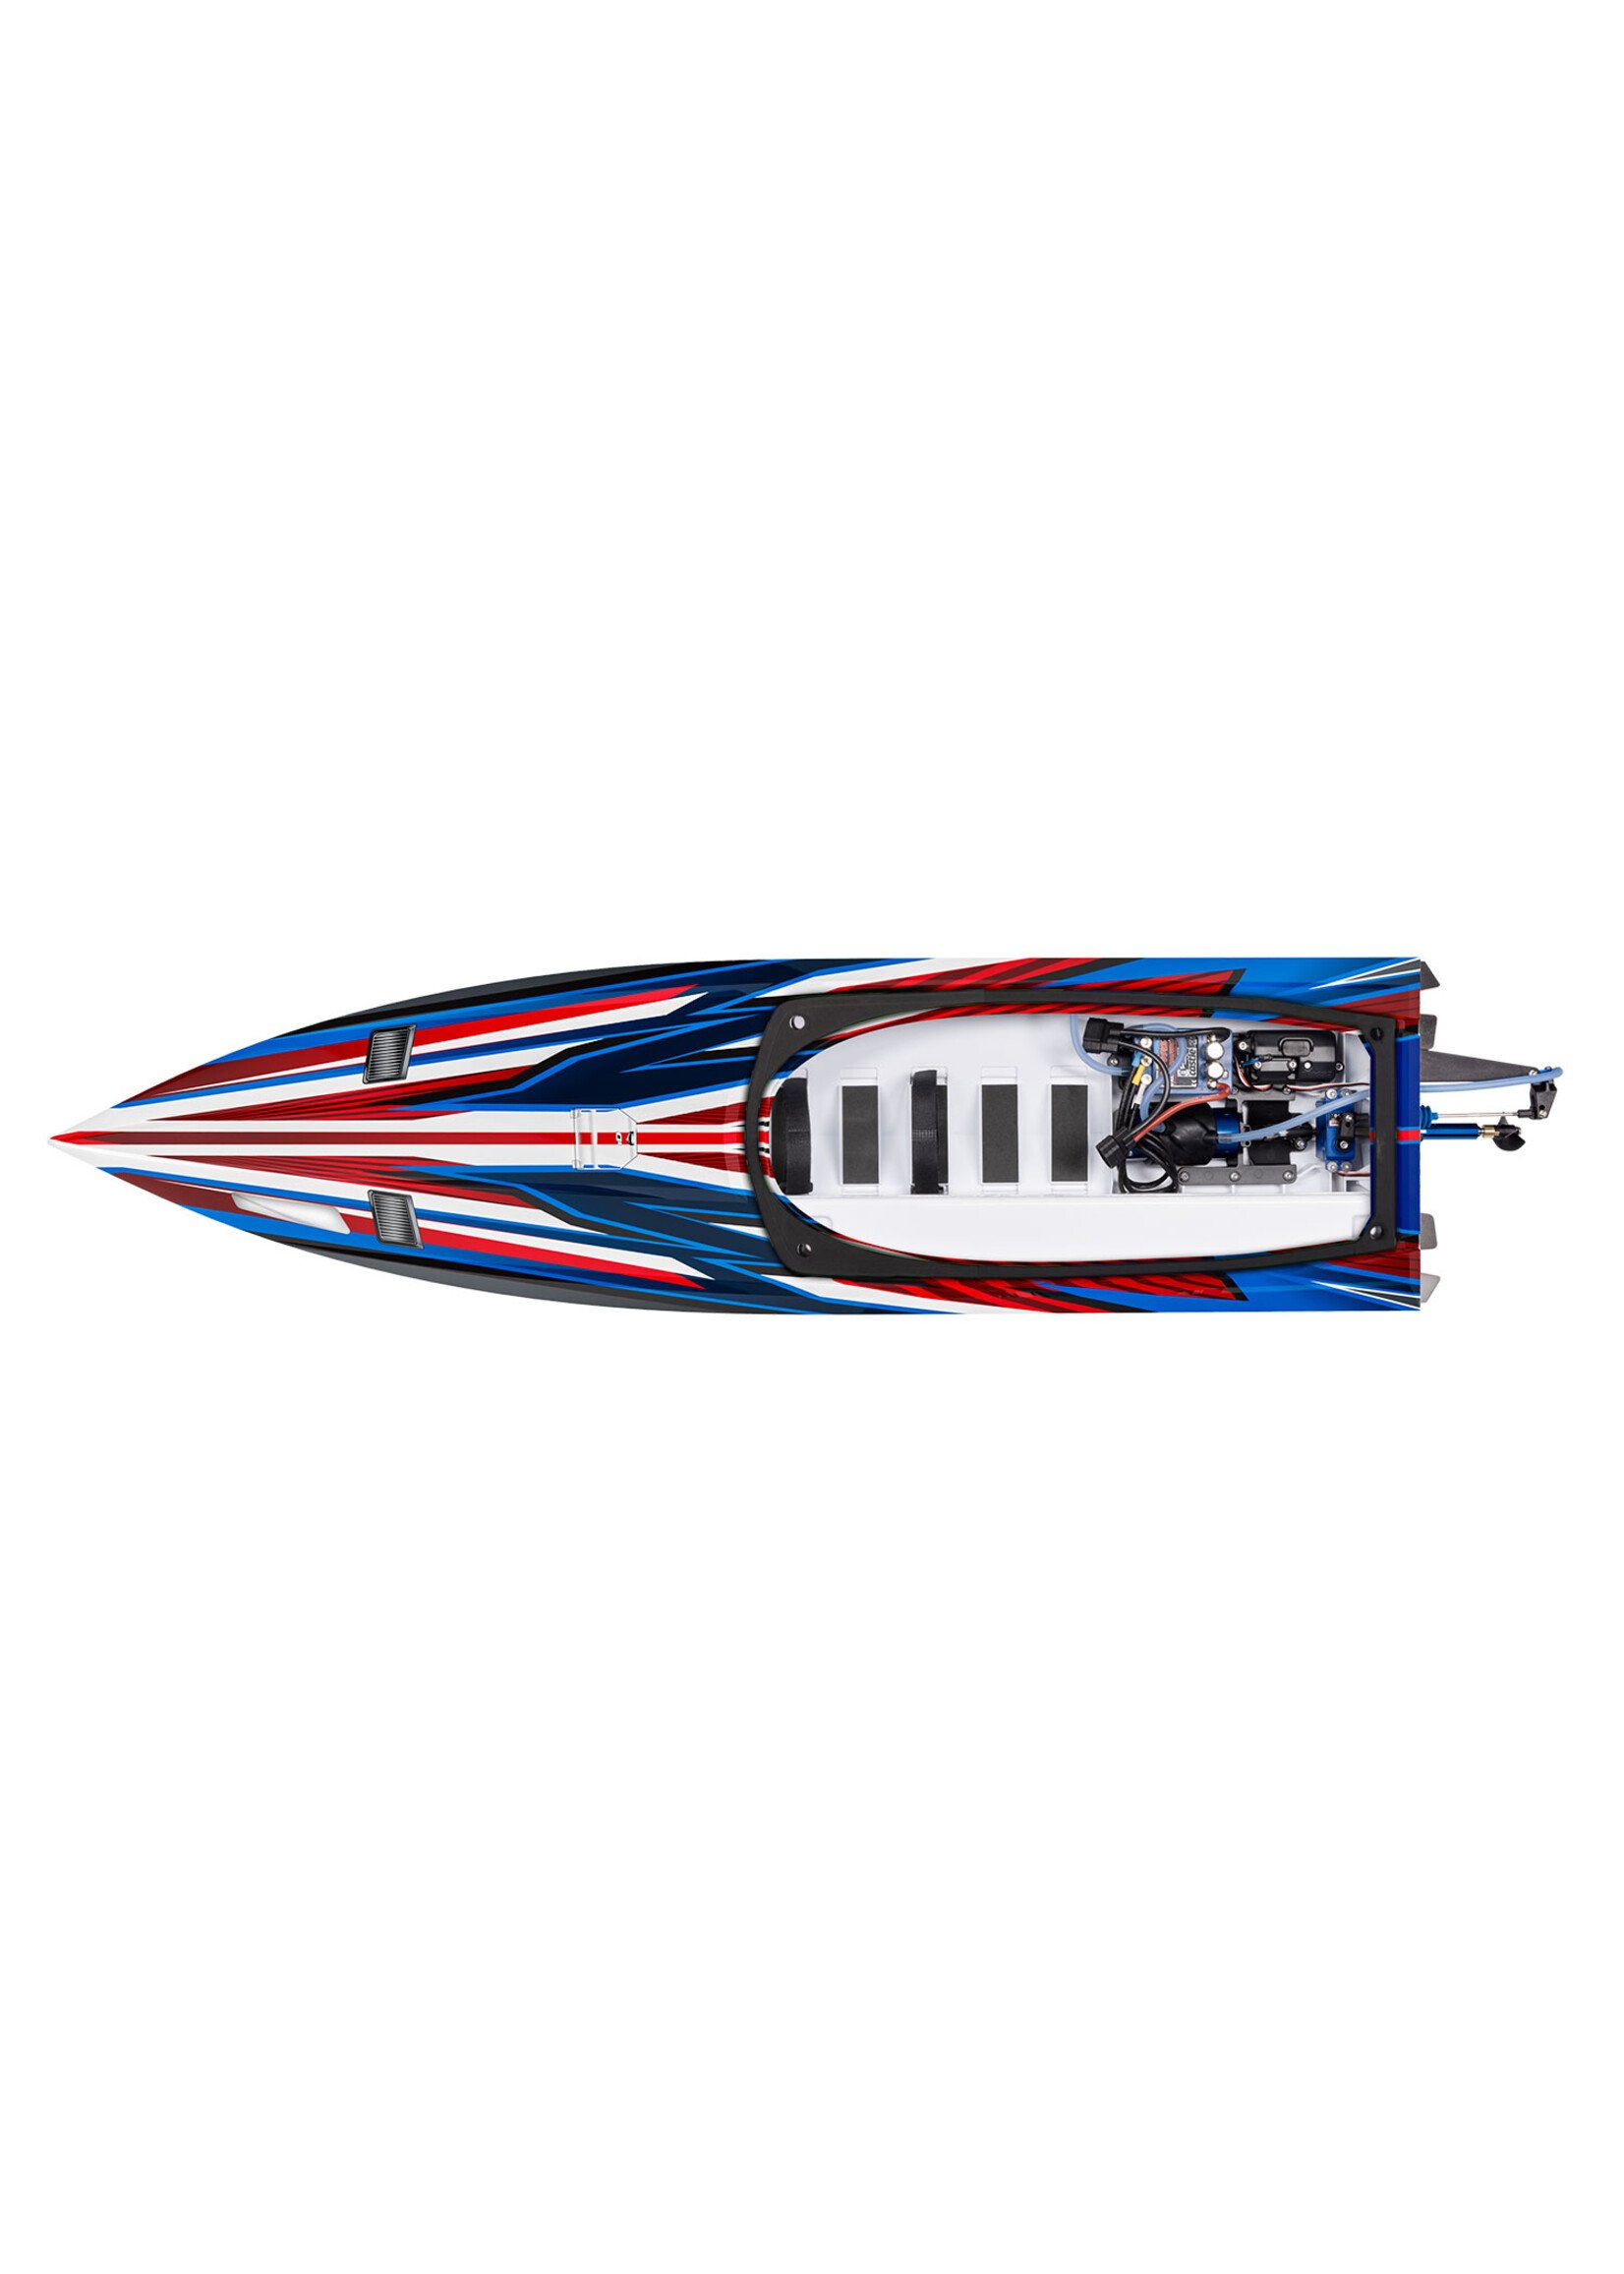 Traxxas 1030764RED - Spartan 36" SR Boat - Red